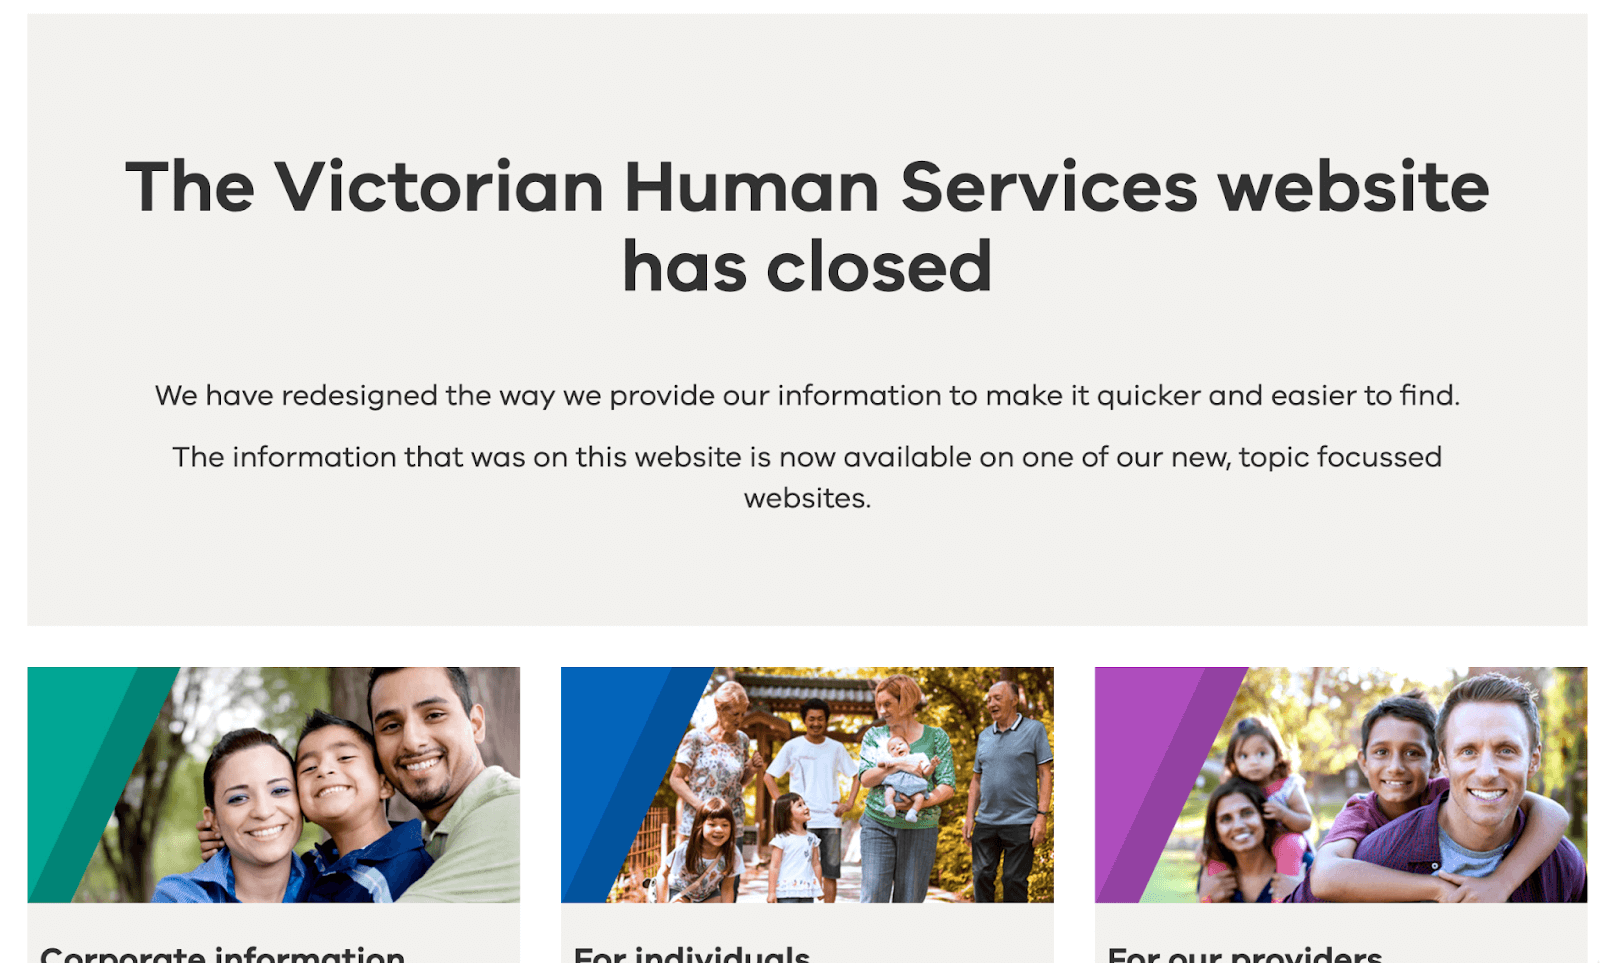 DHS Victoria is now closed. 3 sites now replace this 1 site.